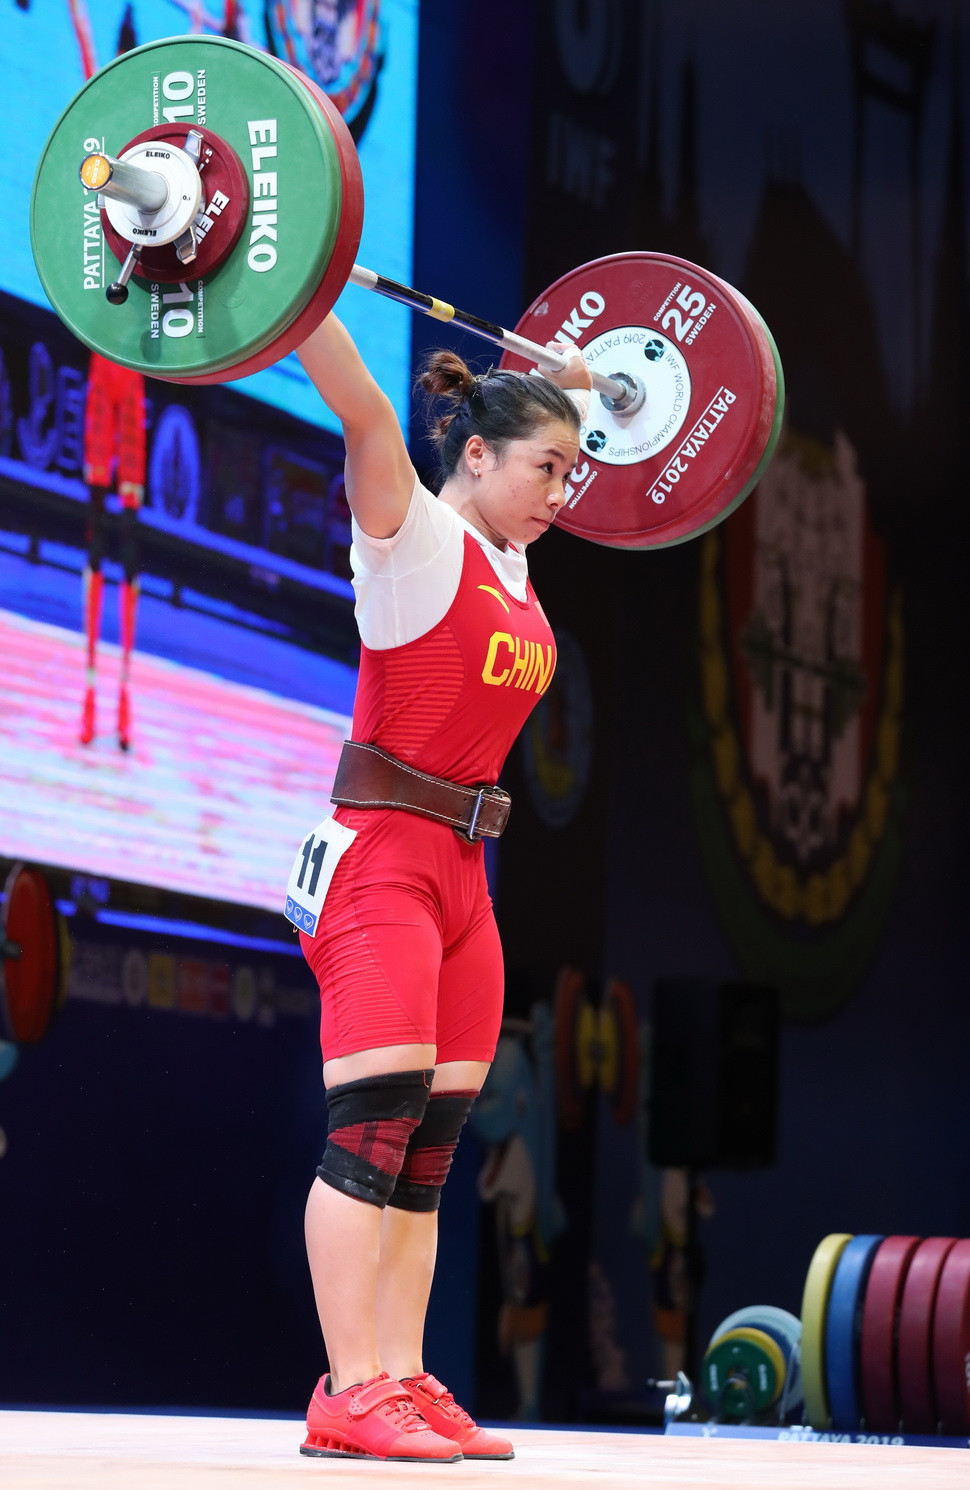 Compatriot Zhang Wanqiong came second in the total ©IWF